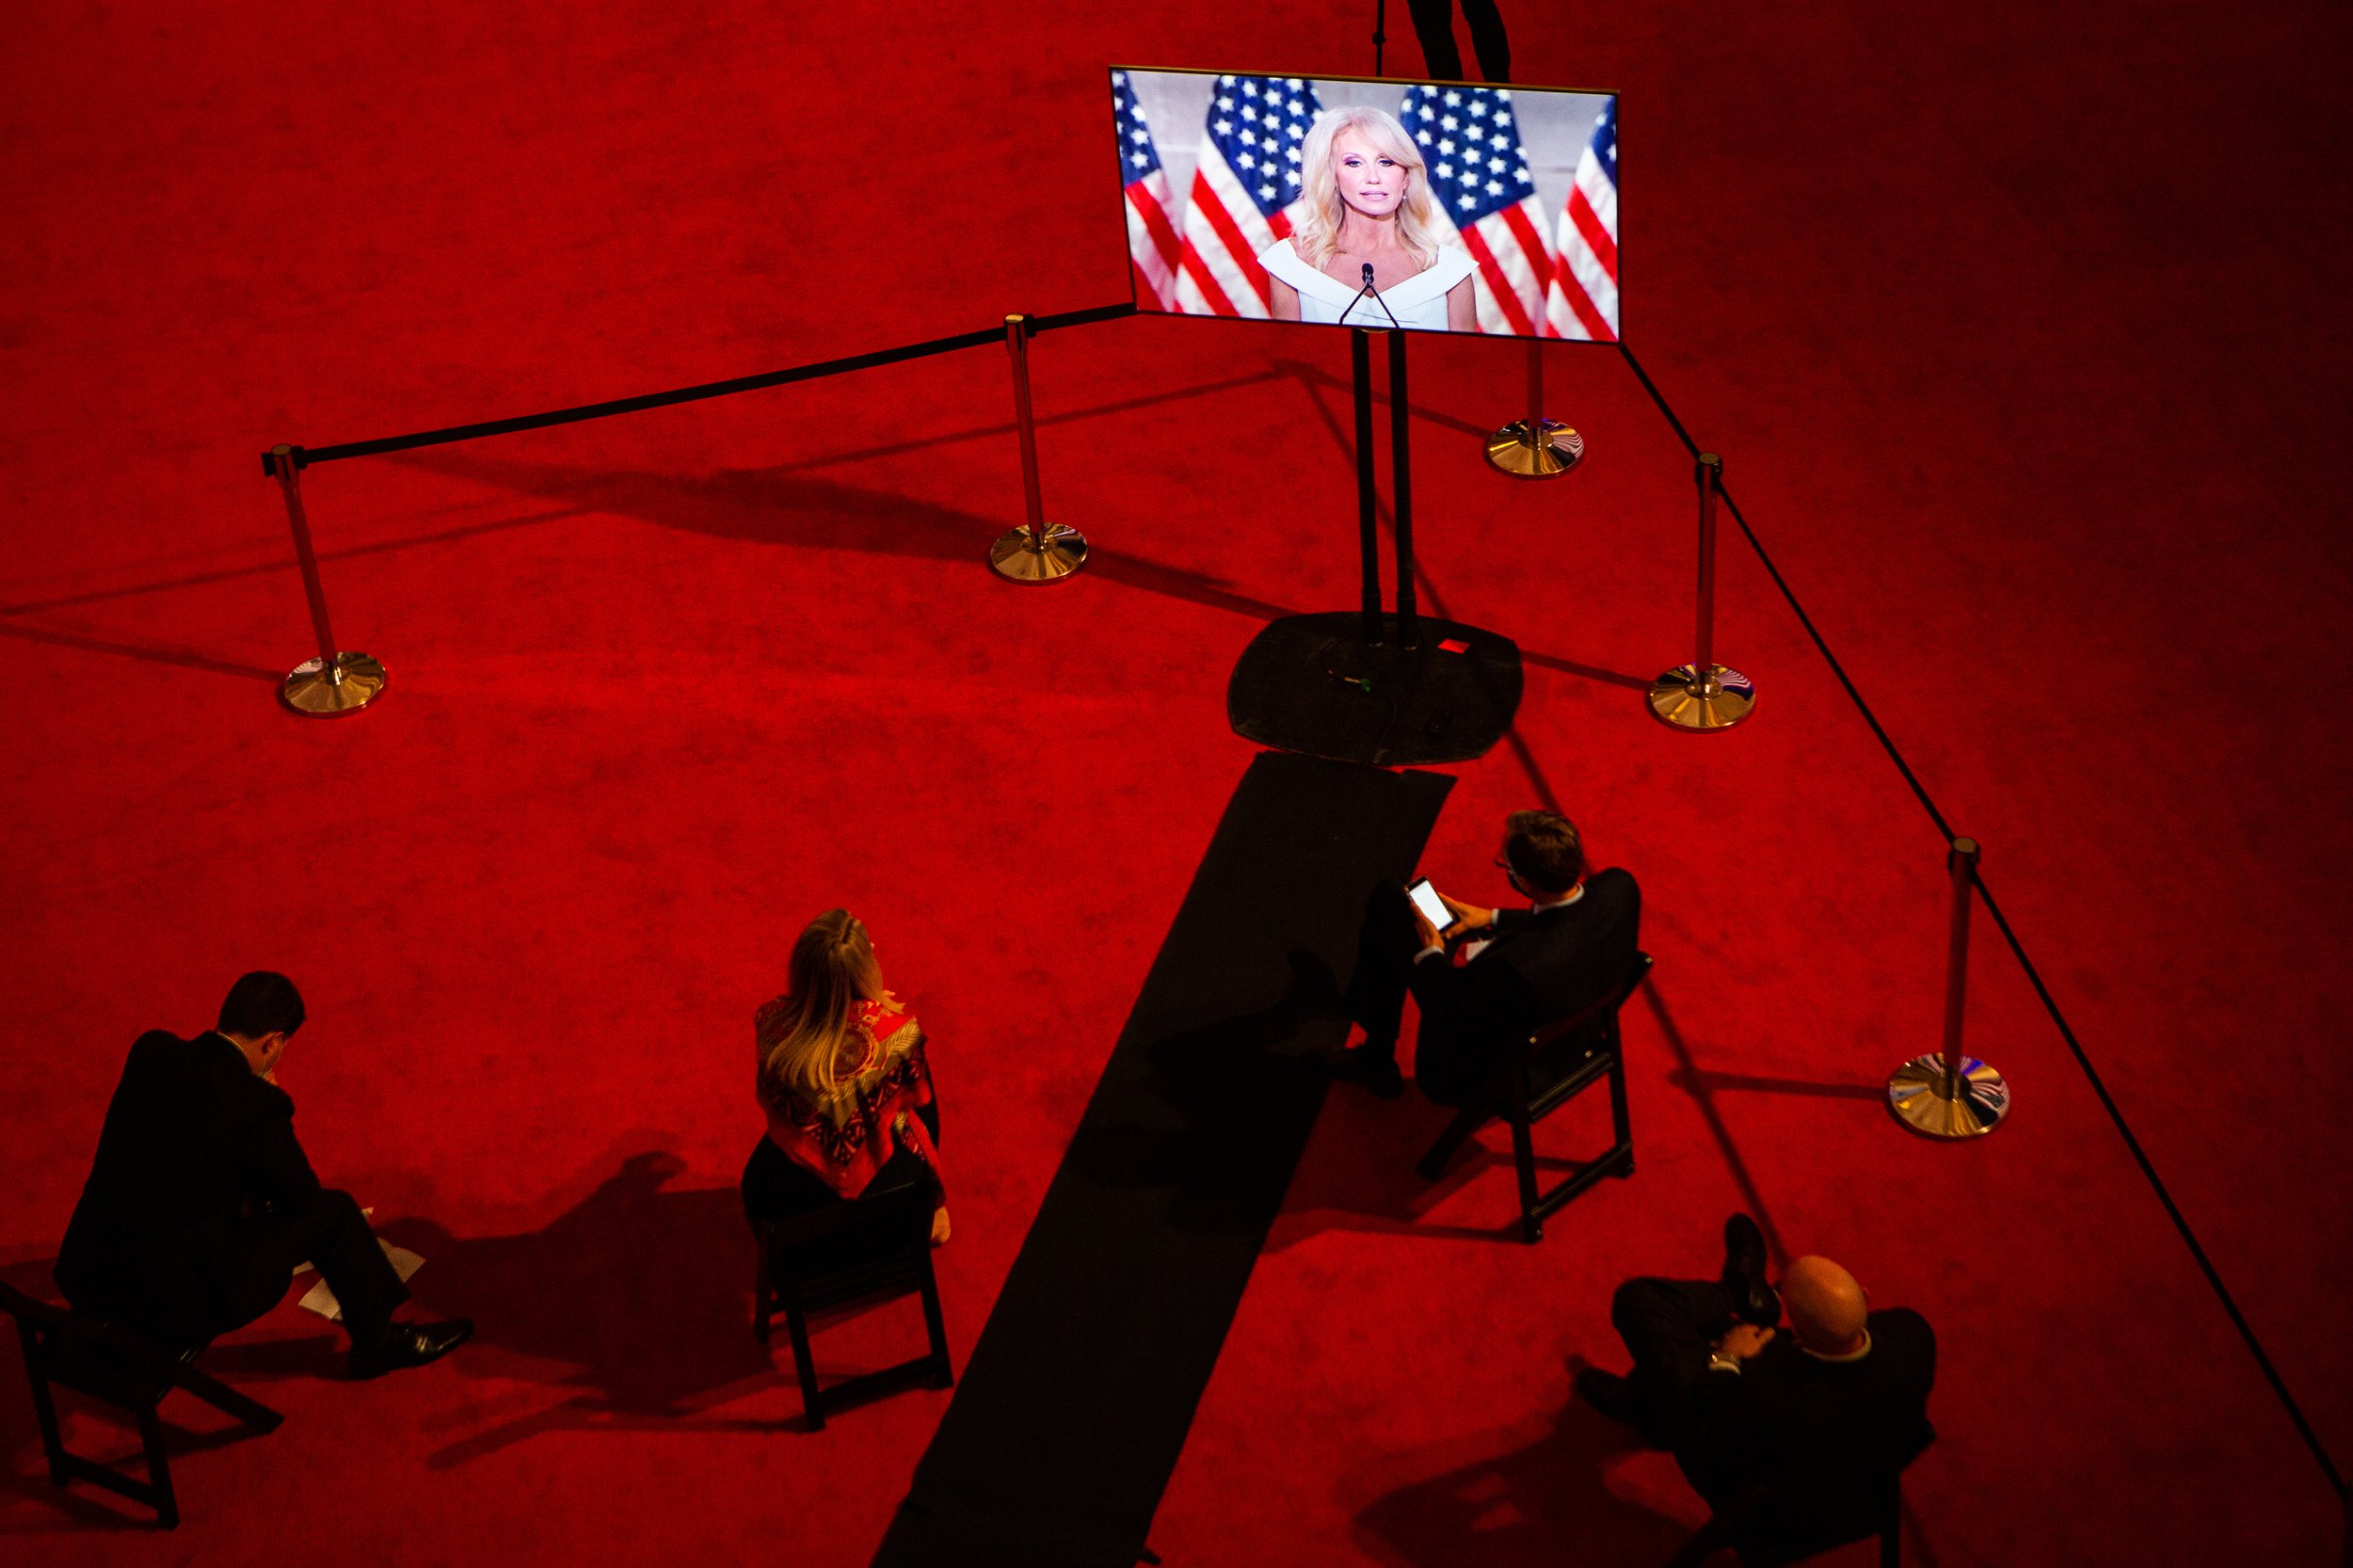  Kellyanne Conway, counselor to President Trump, gives a speech on screen during the Republican National Convention at the Andrew W. Mellon Auditorium in Washington, D.C. 